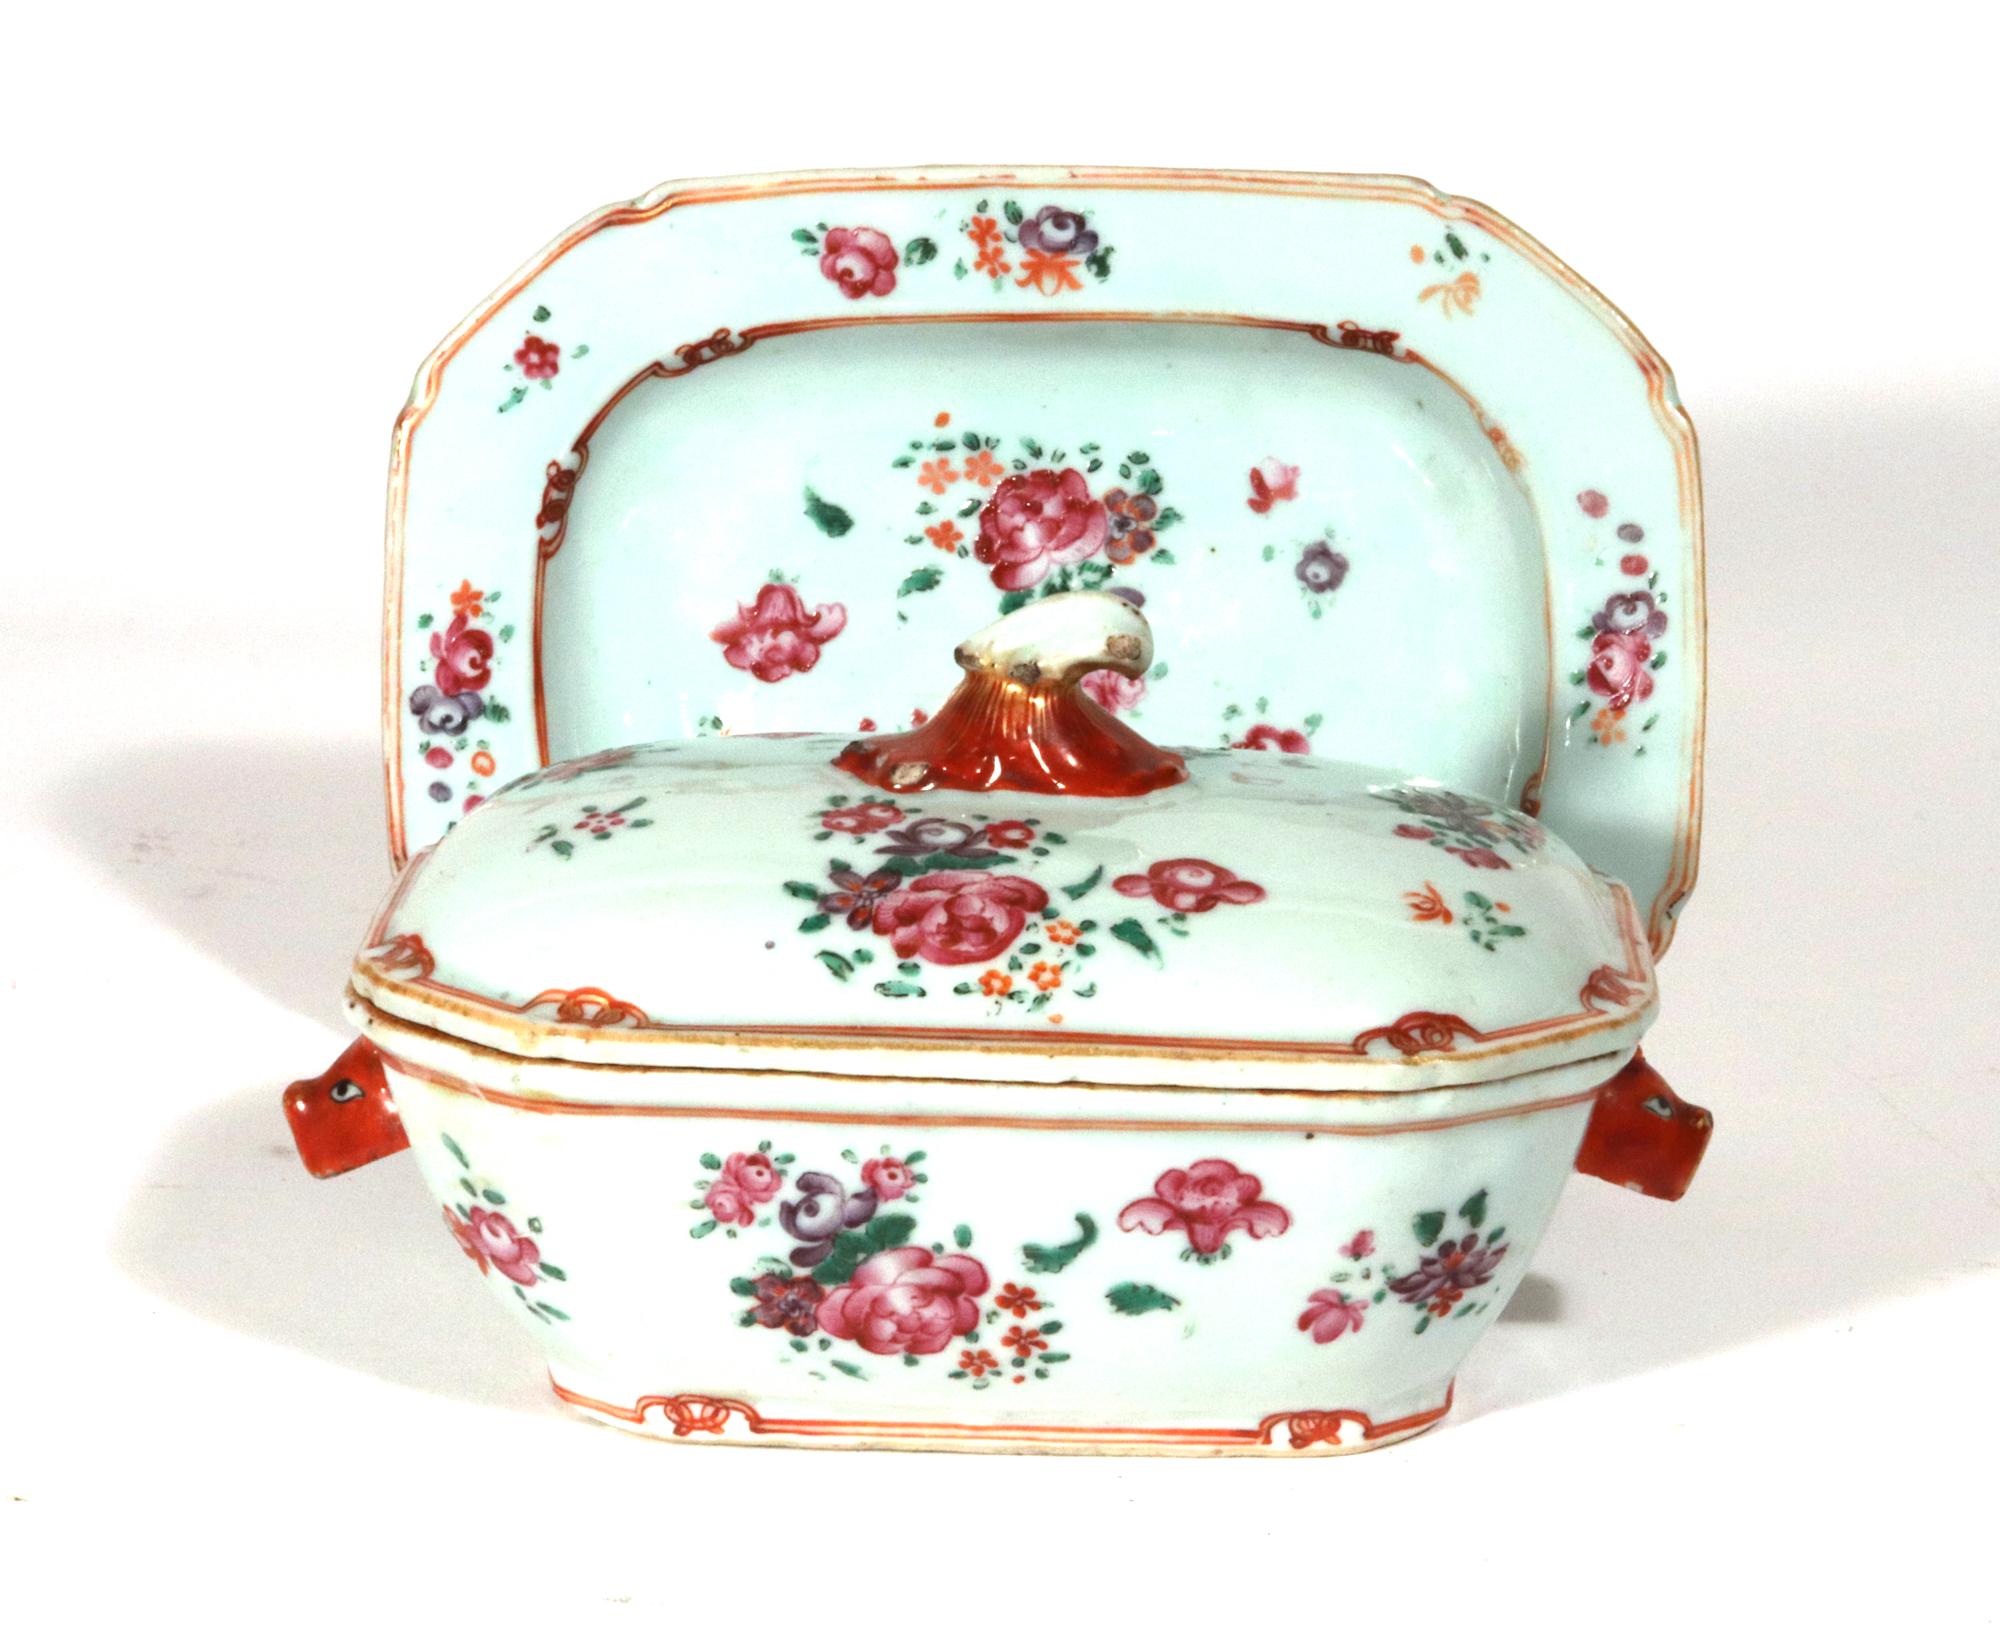 Chinese Export Porcelain Famille Rose Sauce Tureens, Covers & Stands For Sale 5